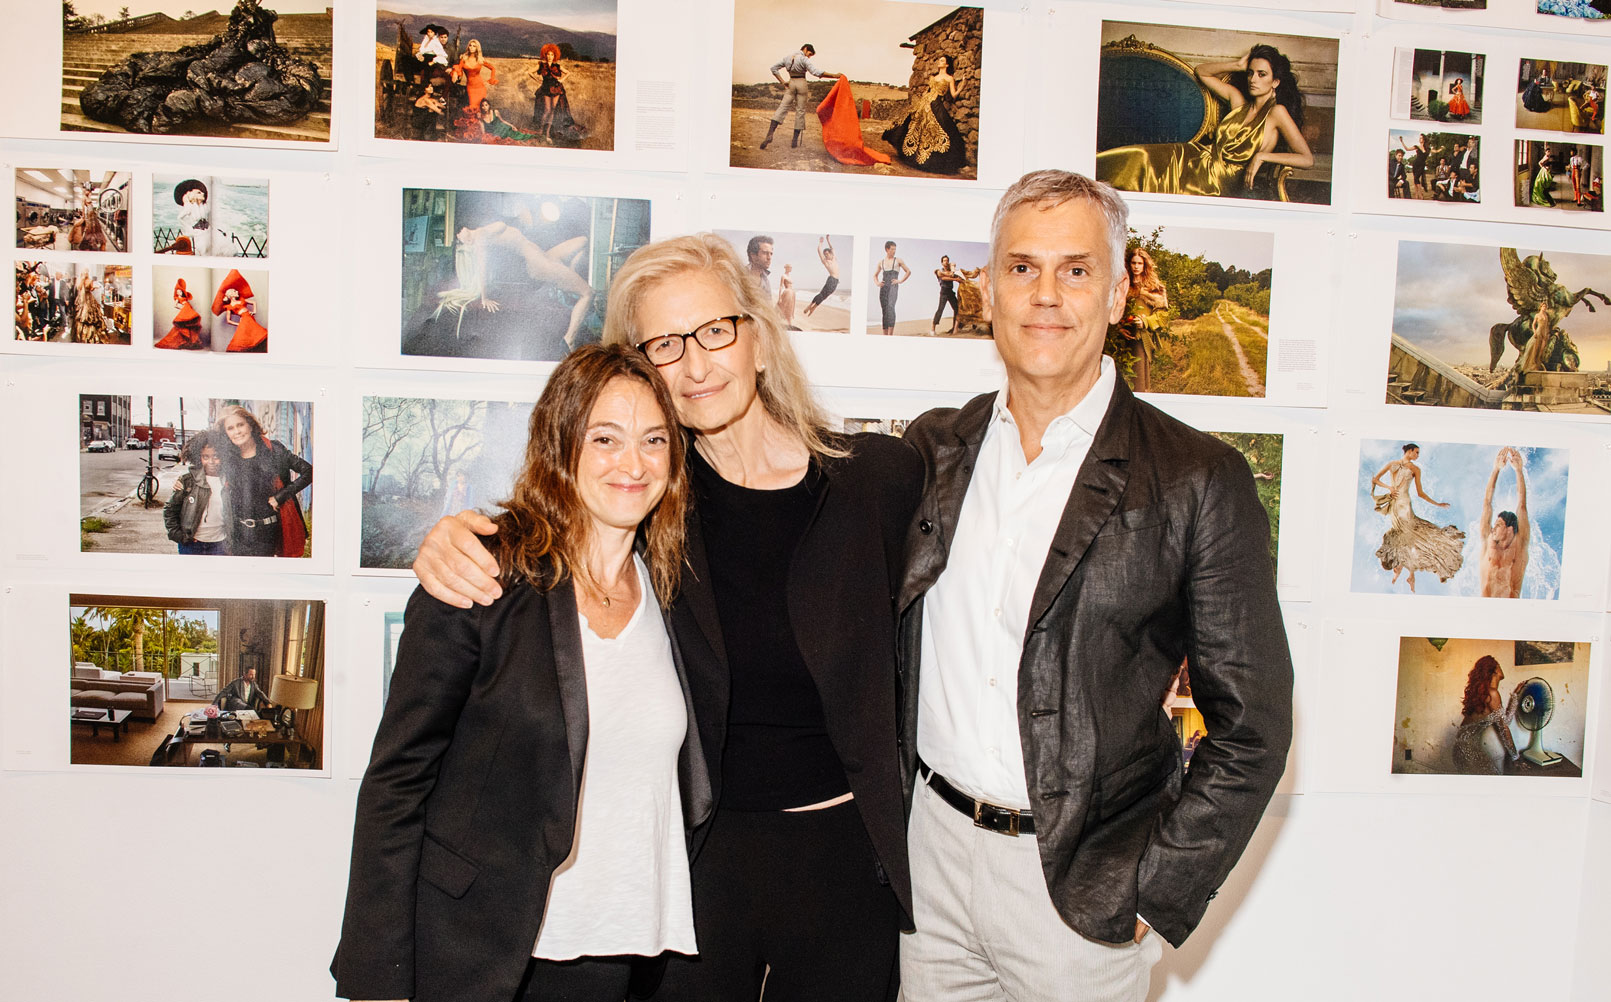 Phaidon VP and Group Publisher Deb Aaronson, Annie Leibovitz and Phaidon CEO Keith Fox at Studio 525 in Chelsea